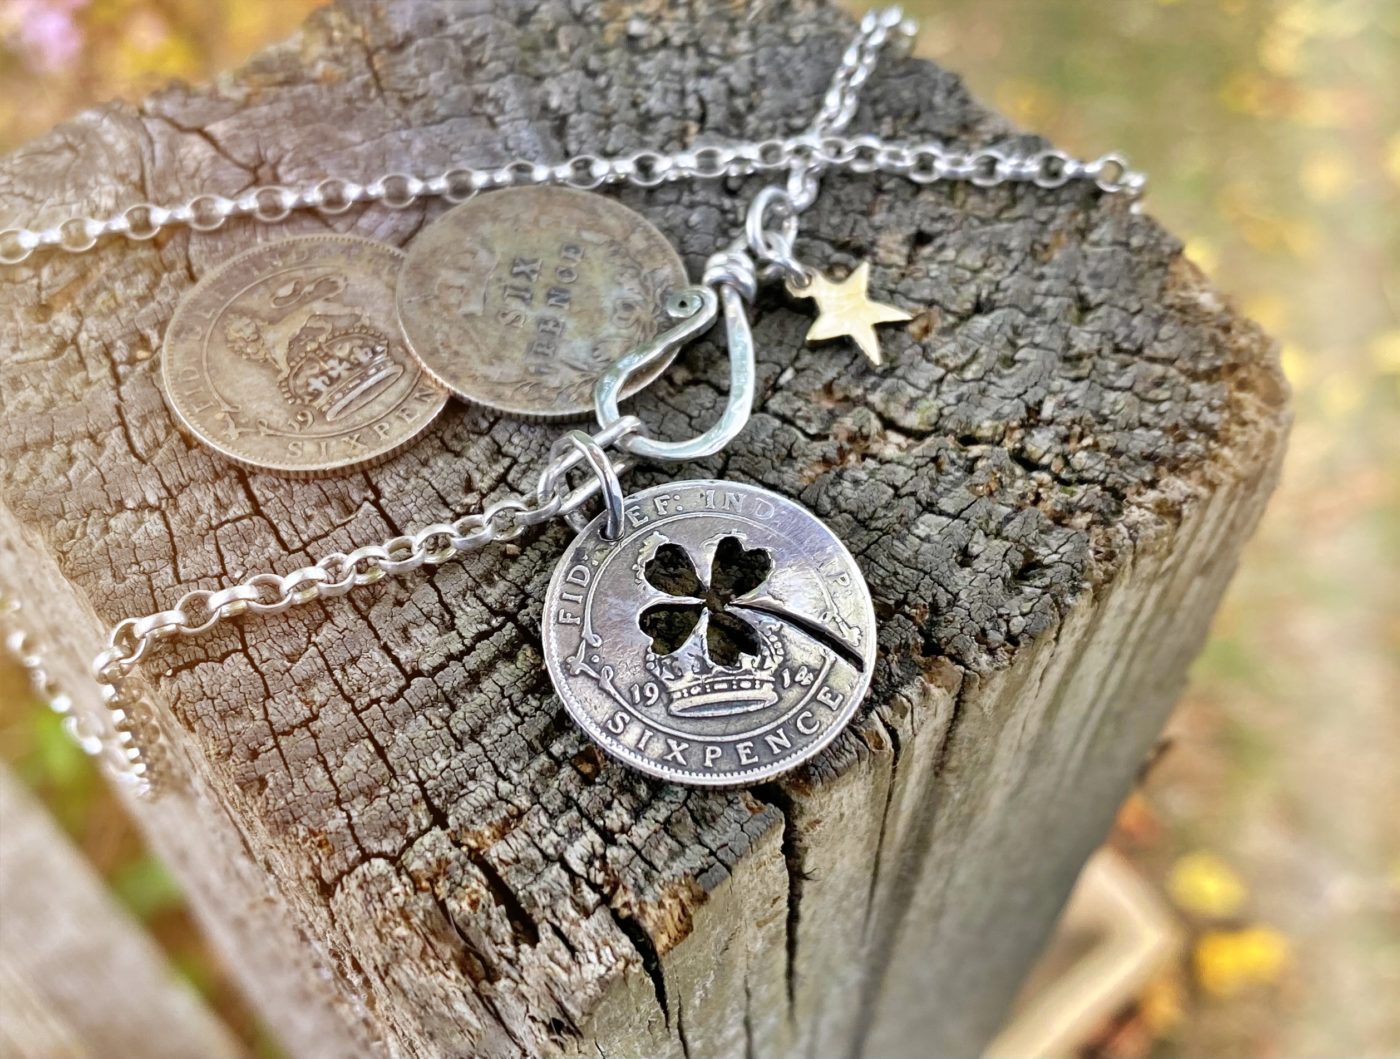 Handmade and repurposed lucky silver sixpence coin necklace pendant